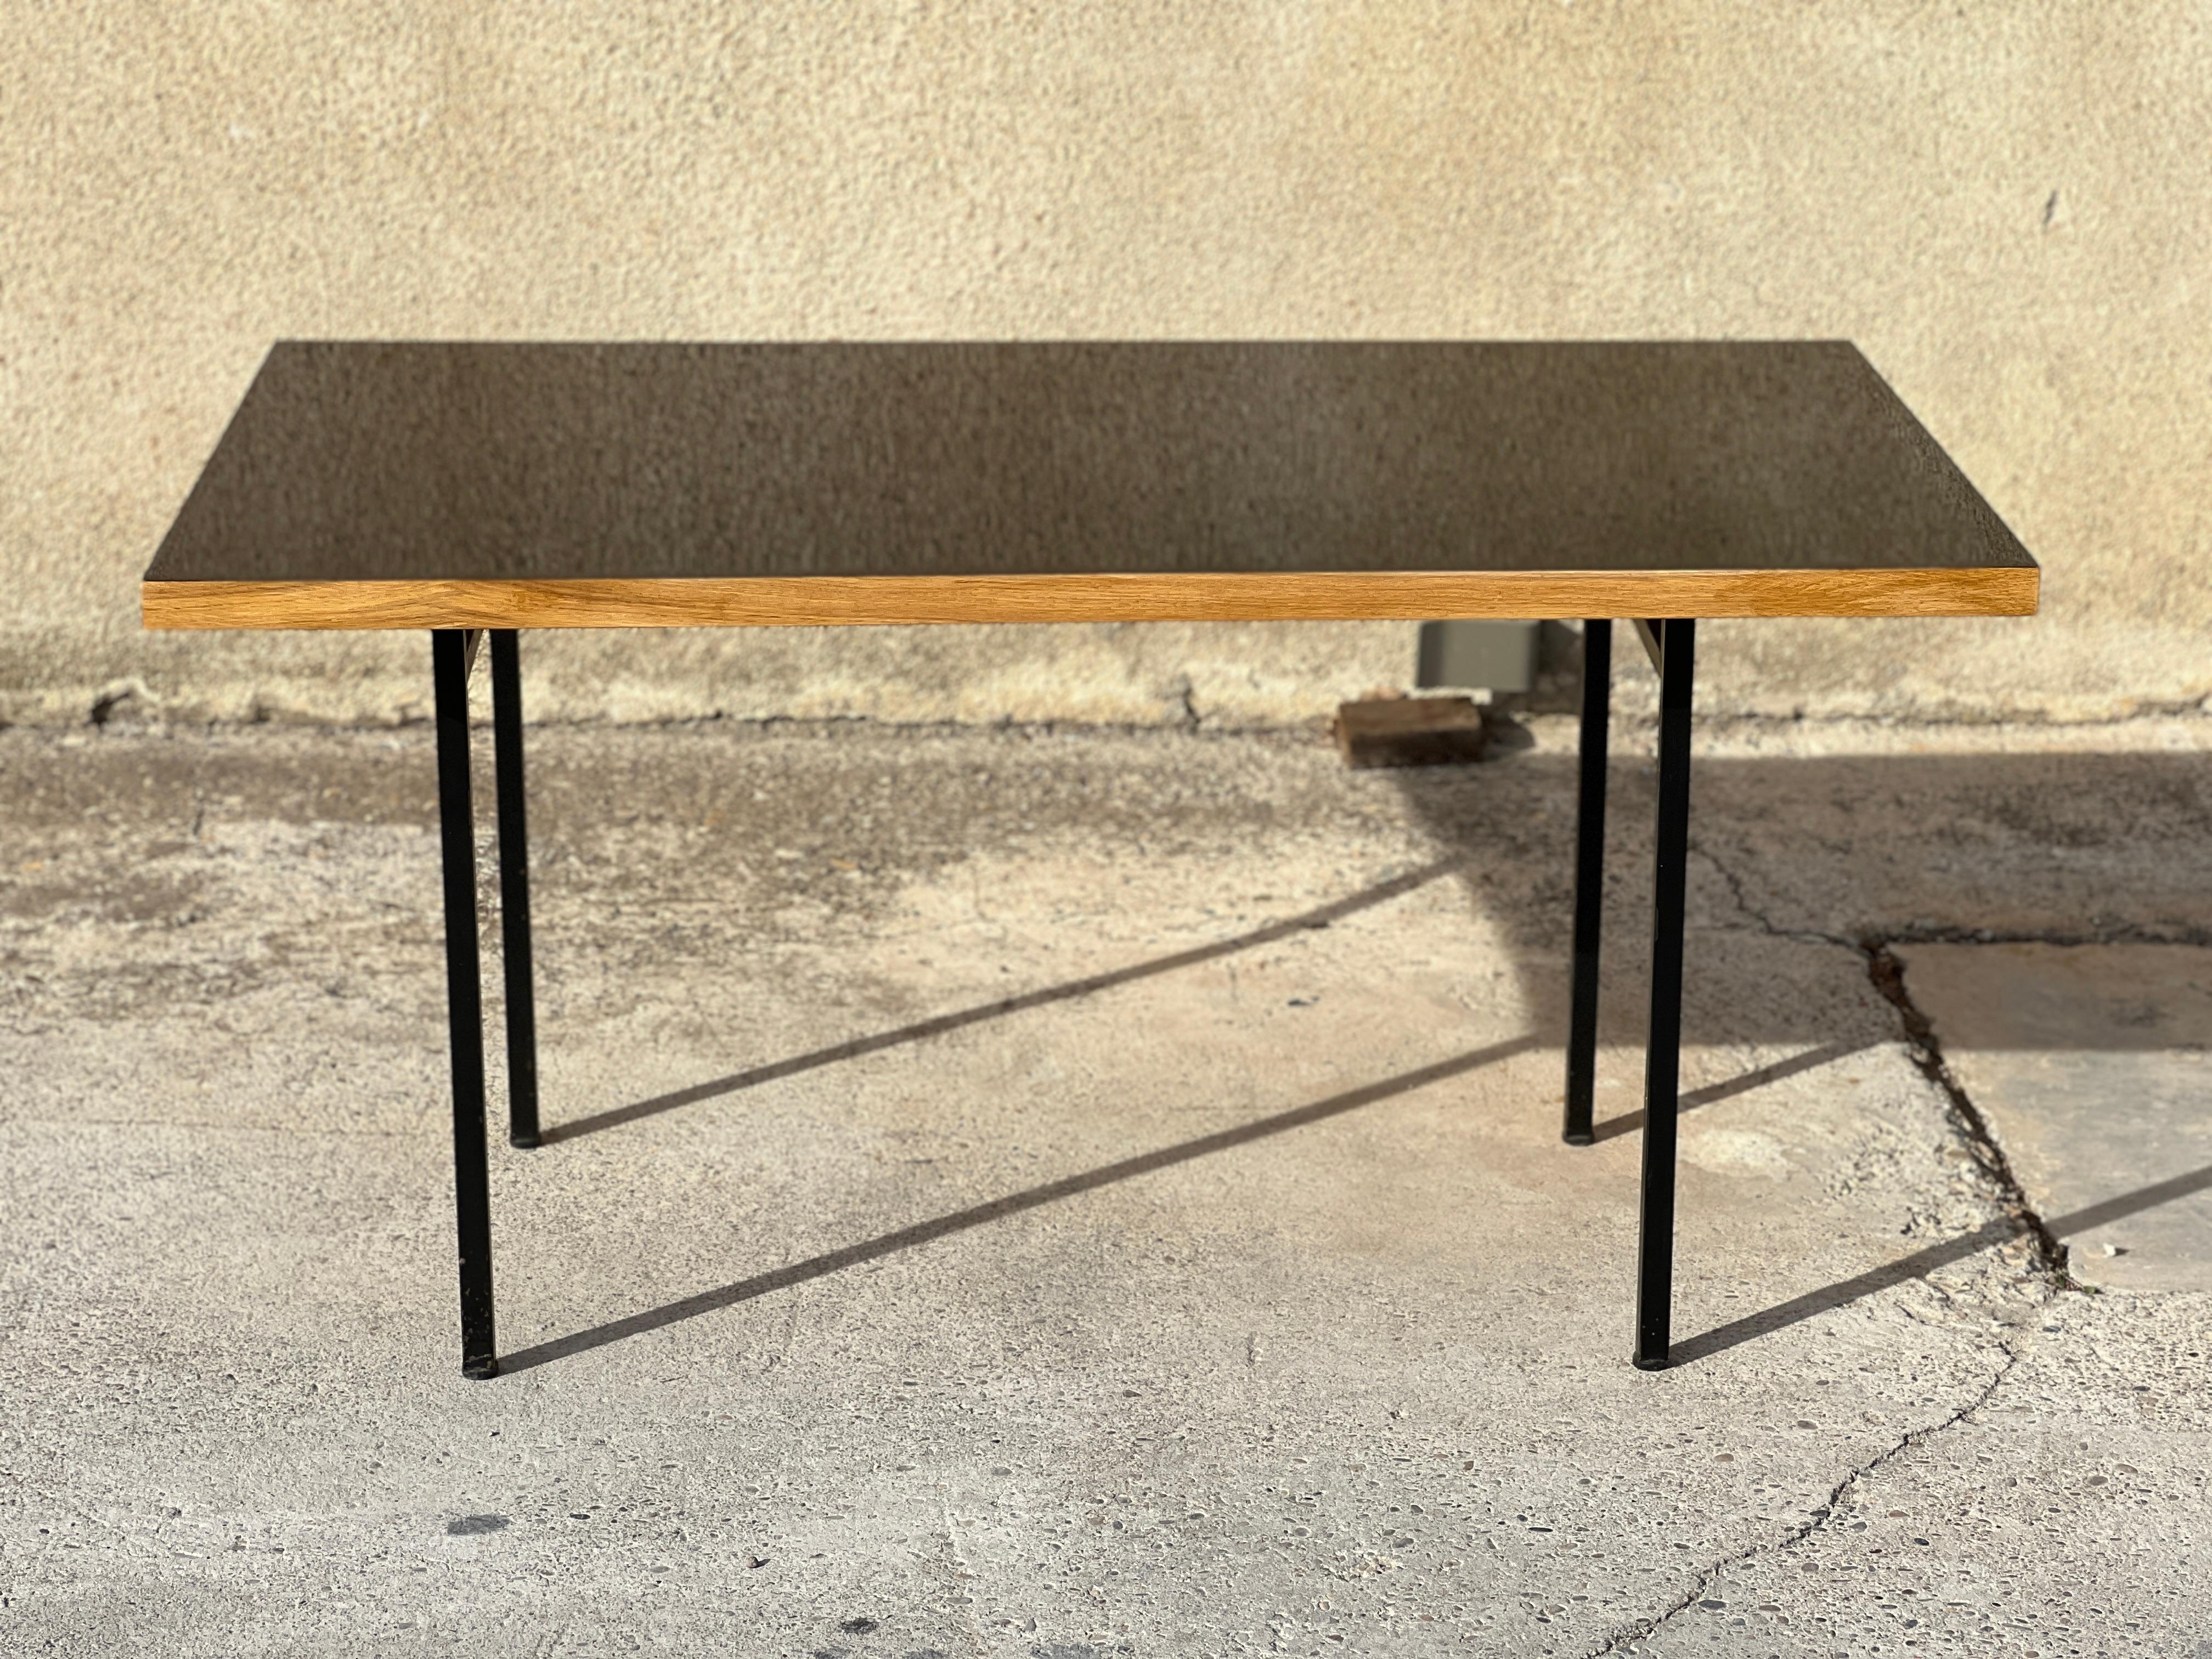 Florence Knoll table/desk. Structure in black lacquered metal and blond wood. Top completely restored with a glossy black formica veneer and edges of the wooden top.